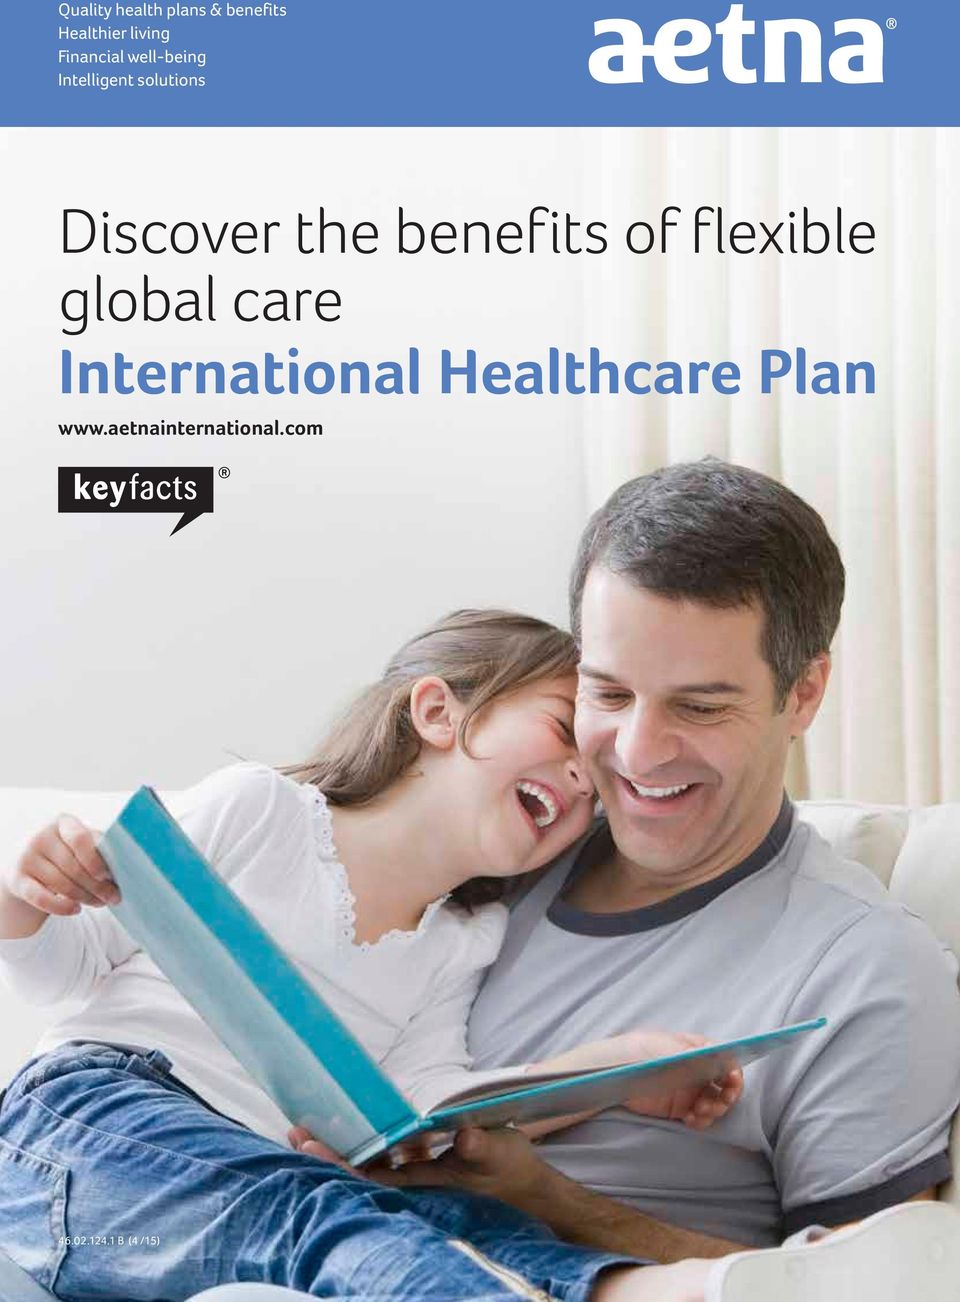 the benefits of flexible global care International